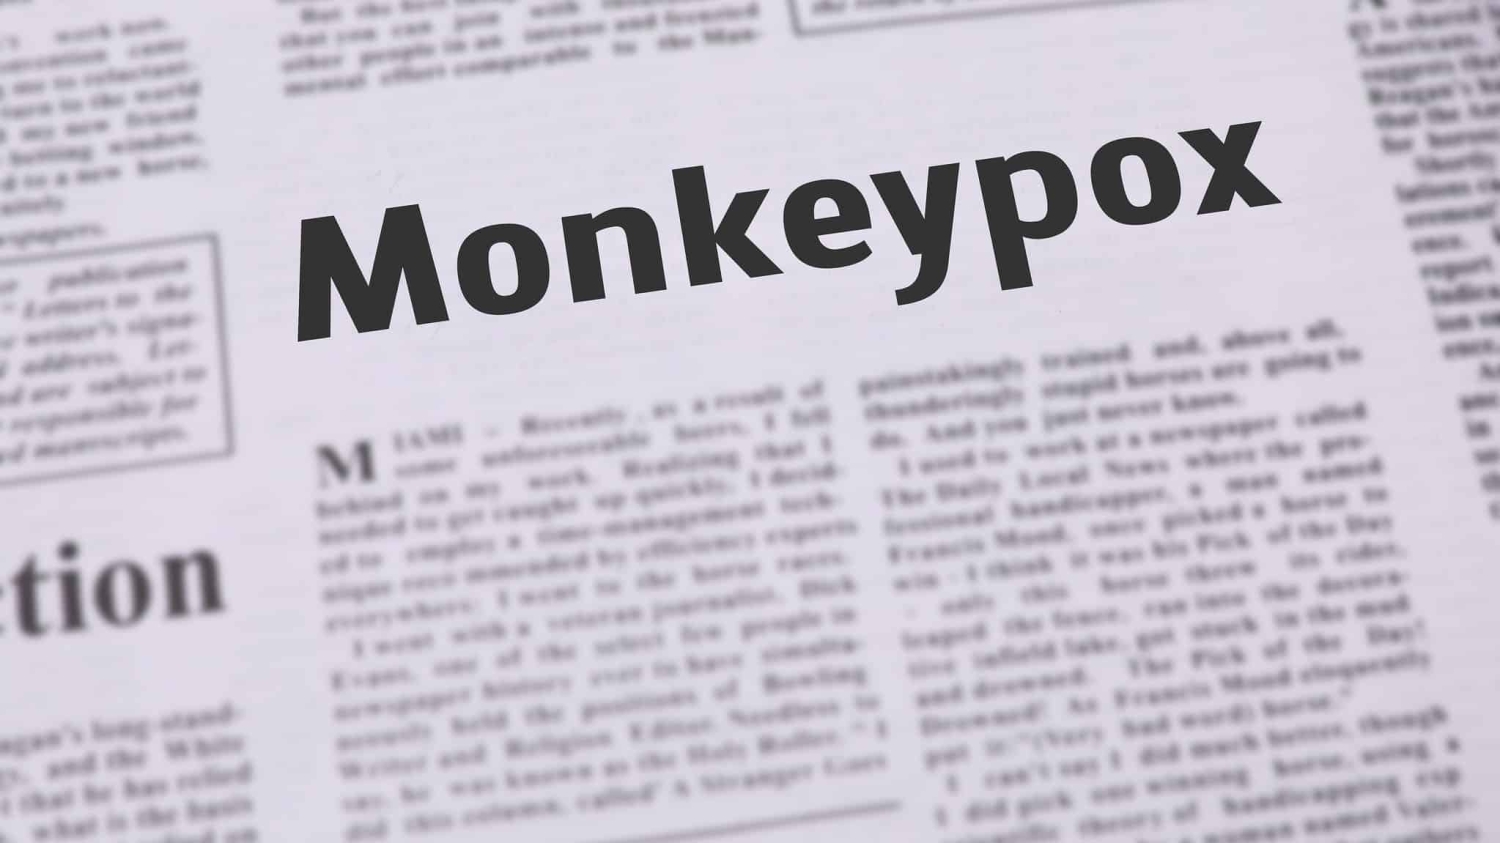 newspaper headline that reads "Monkeypox" - the remainder of the text on the newspaper page is blurred